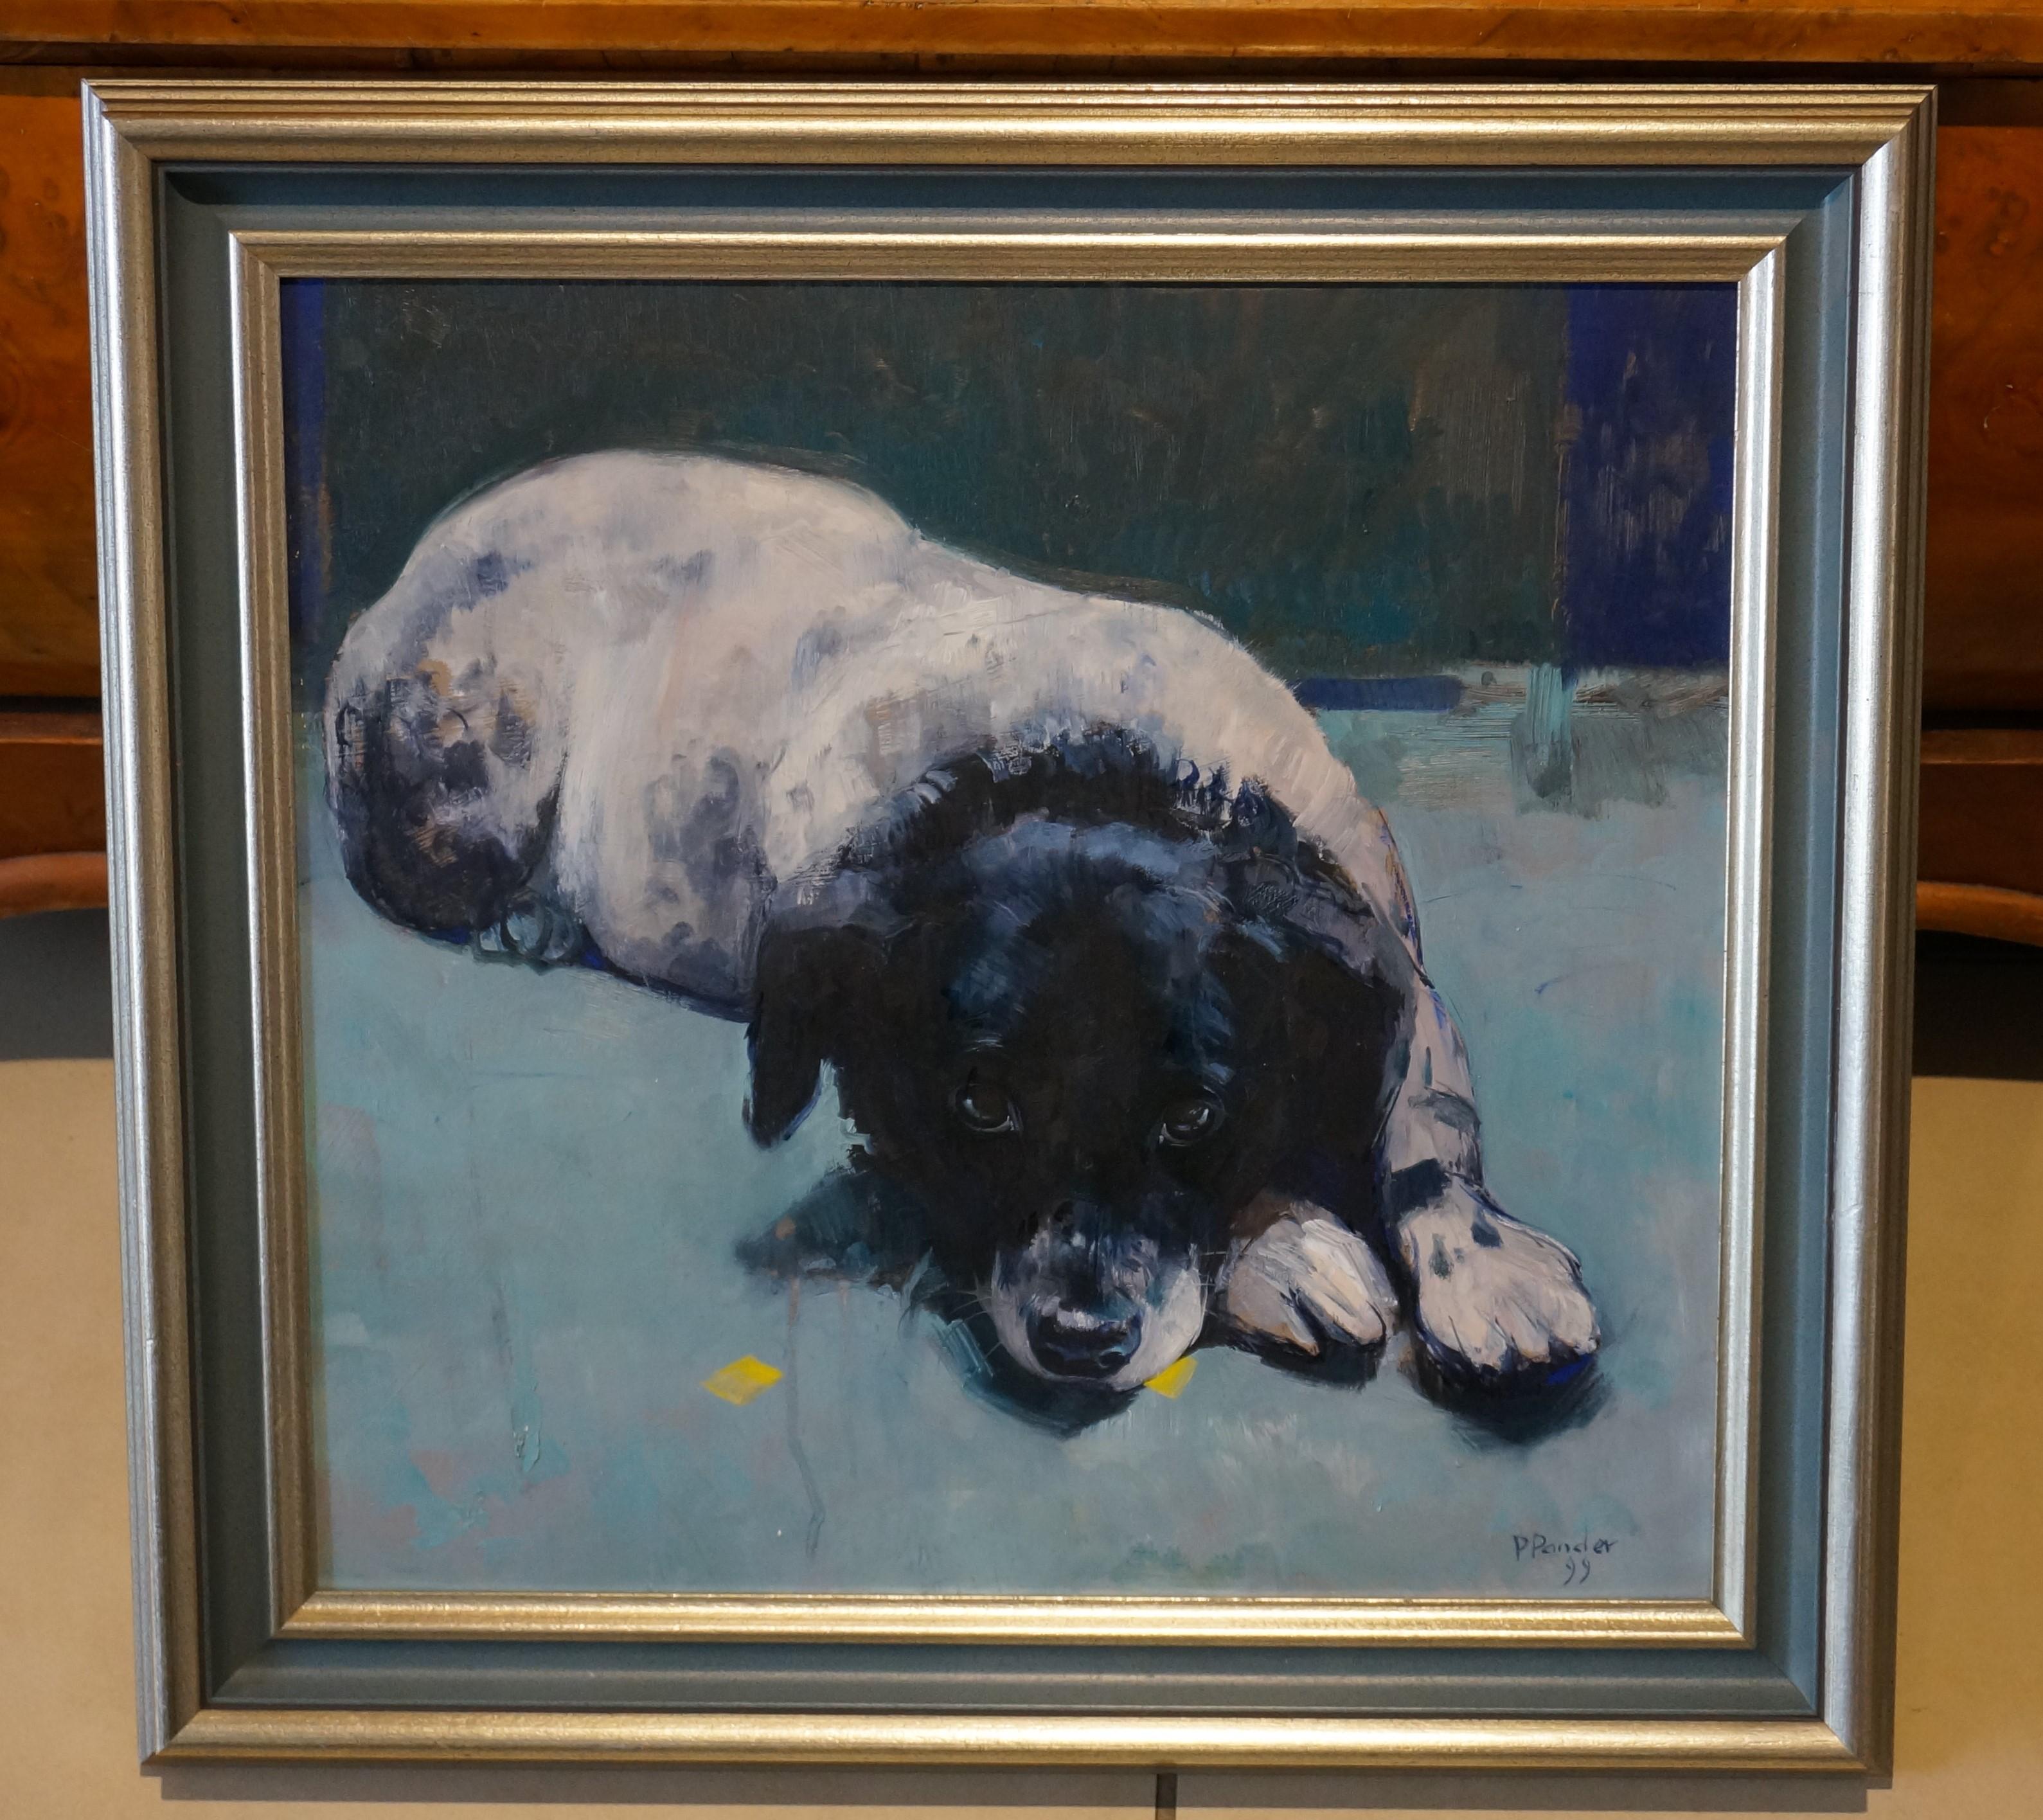 Resting dog Stip (Spot) - Painting by Pieter Pander